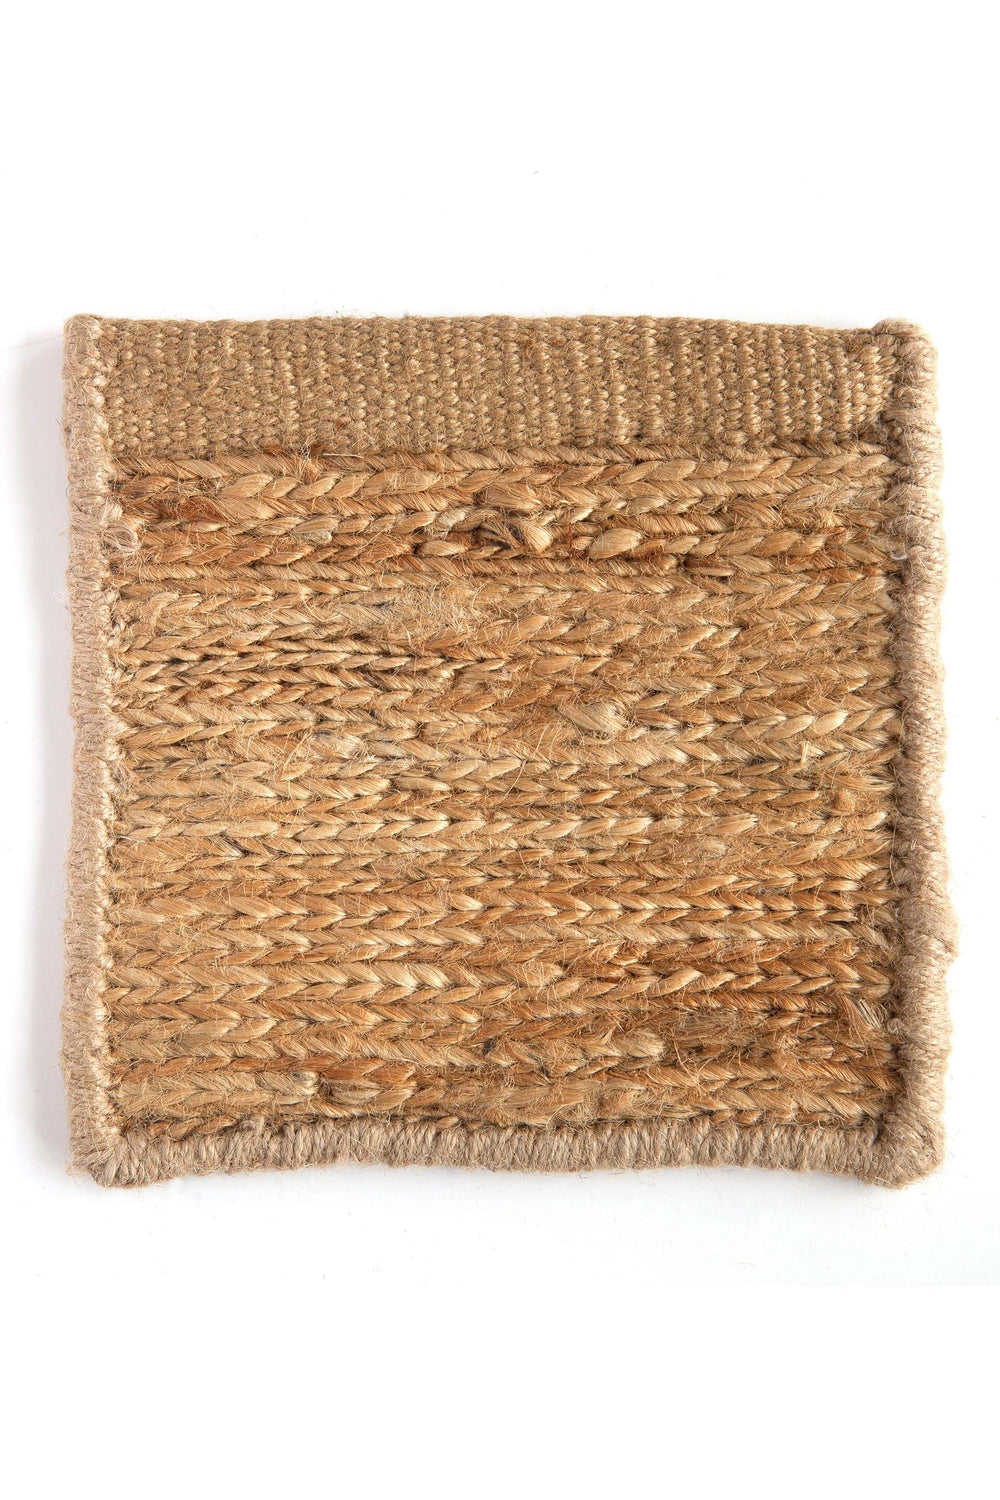 KNITTED NATURAL